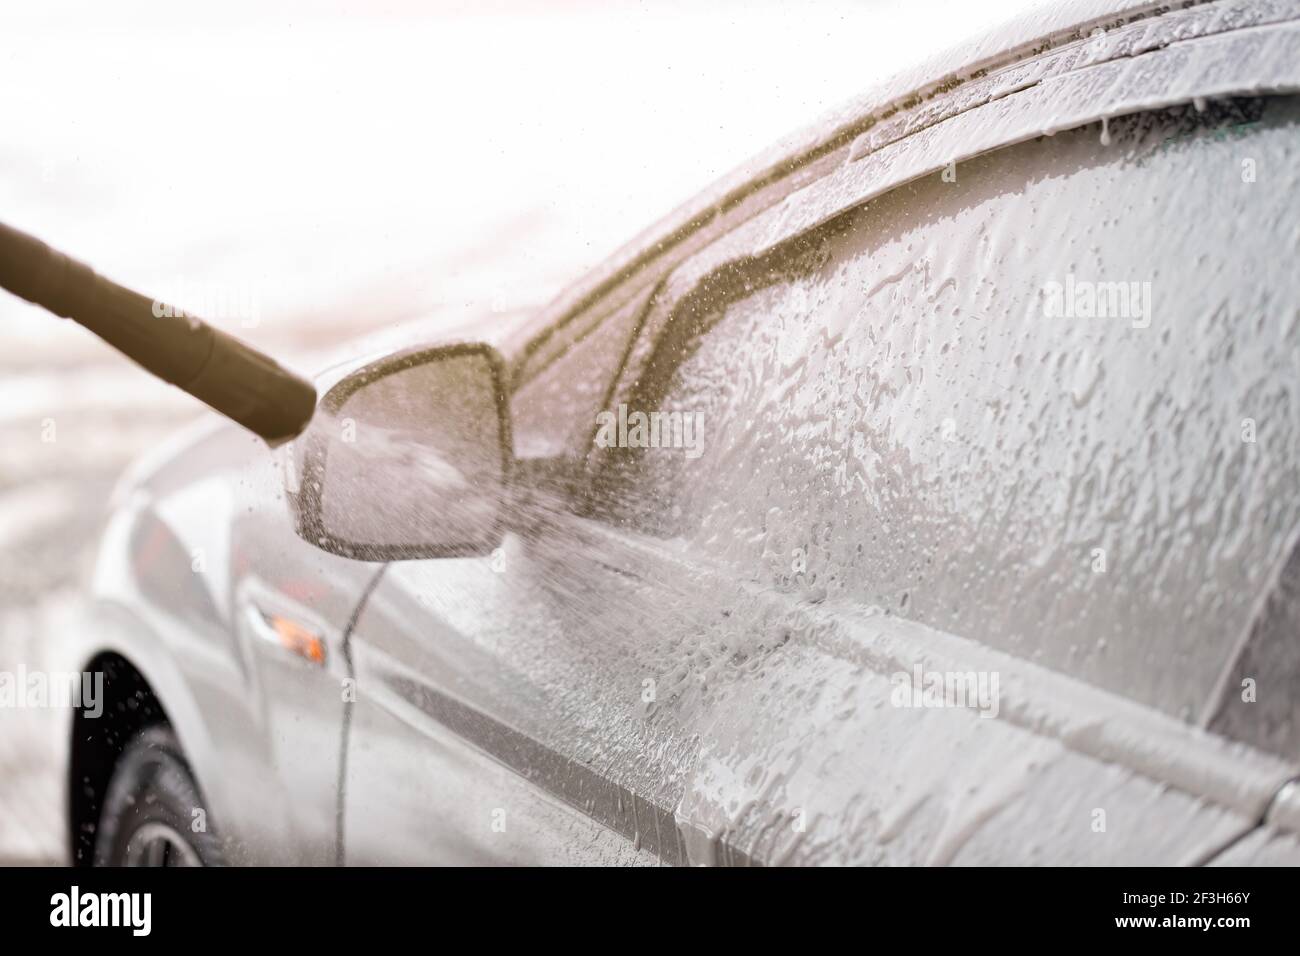 Cleaning car with high pressure hose in exterior washbasin Stock Photo